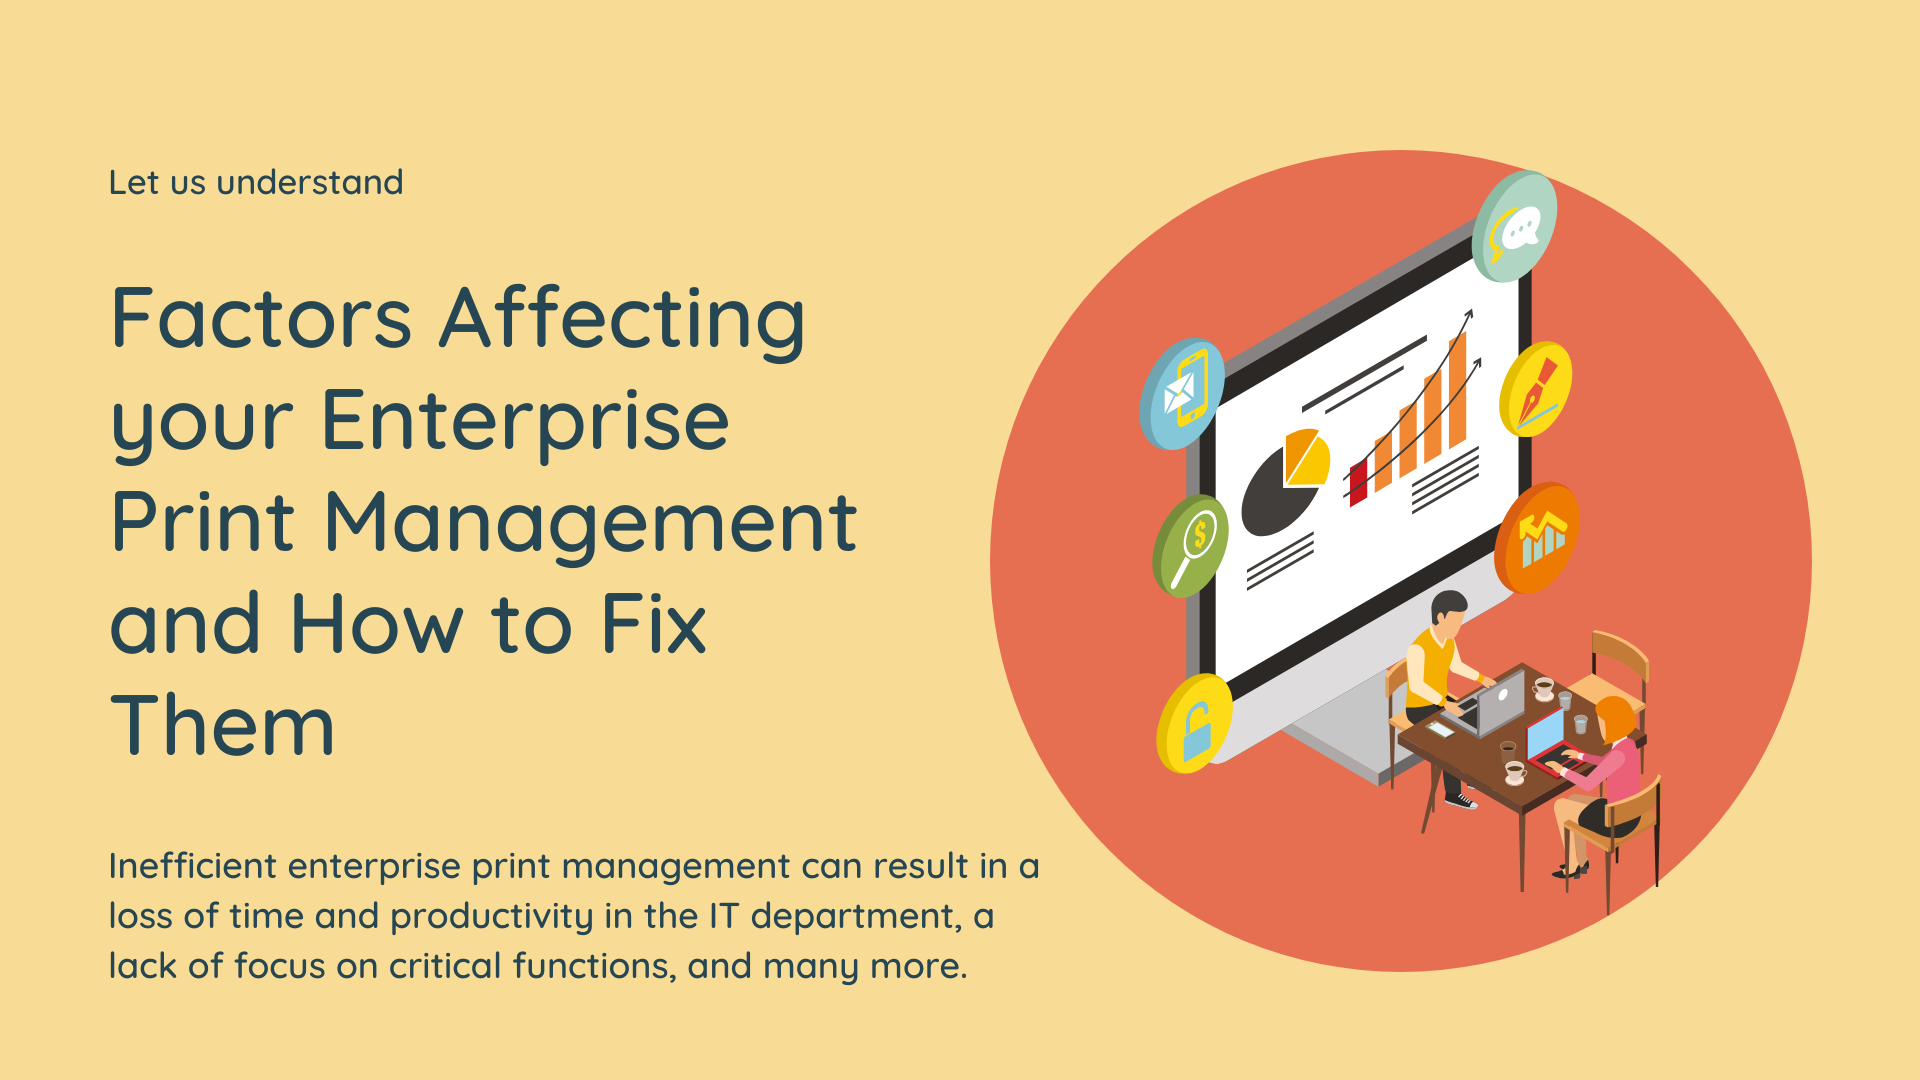 Factors Affecting your Enterprise Print Management and How to Fix Them